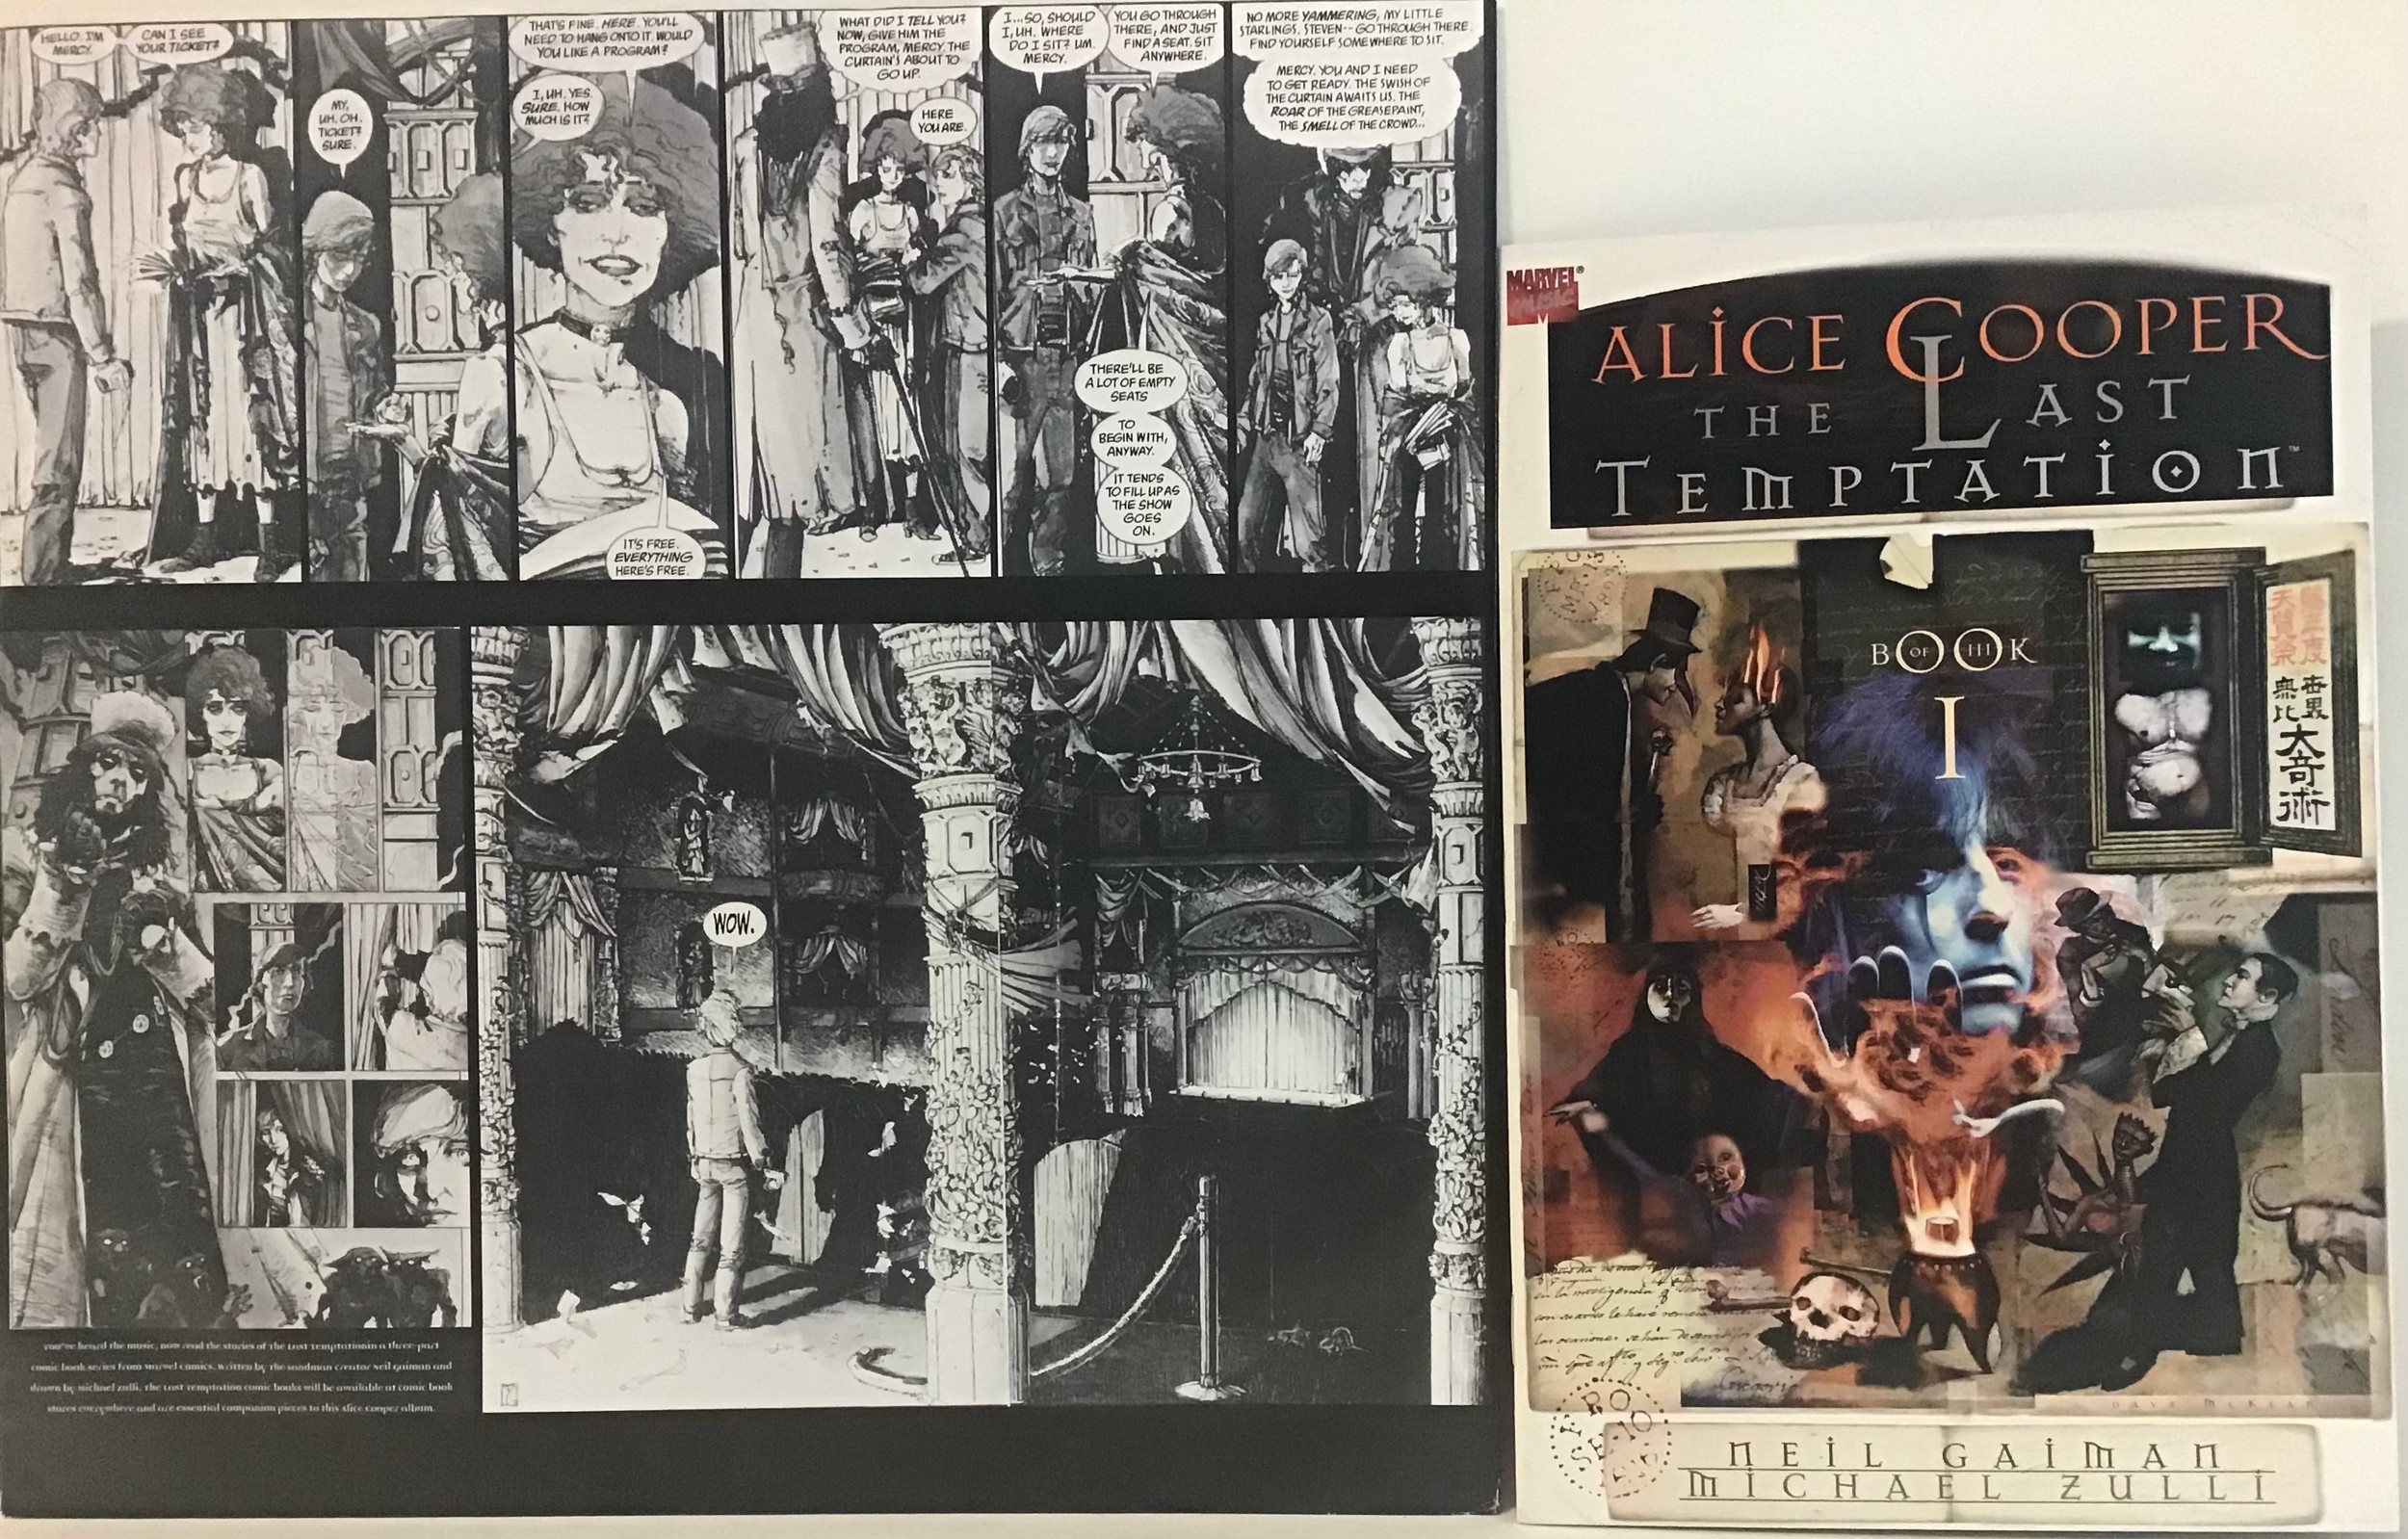 ALICE COOPER 'THE LAST TEMPTATION' BRAND NEW VINYL LP + COMIC BOOK. This is an unplayed album on - Image 3 of 3